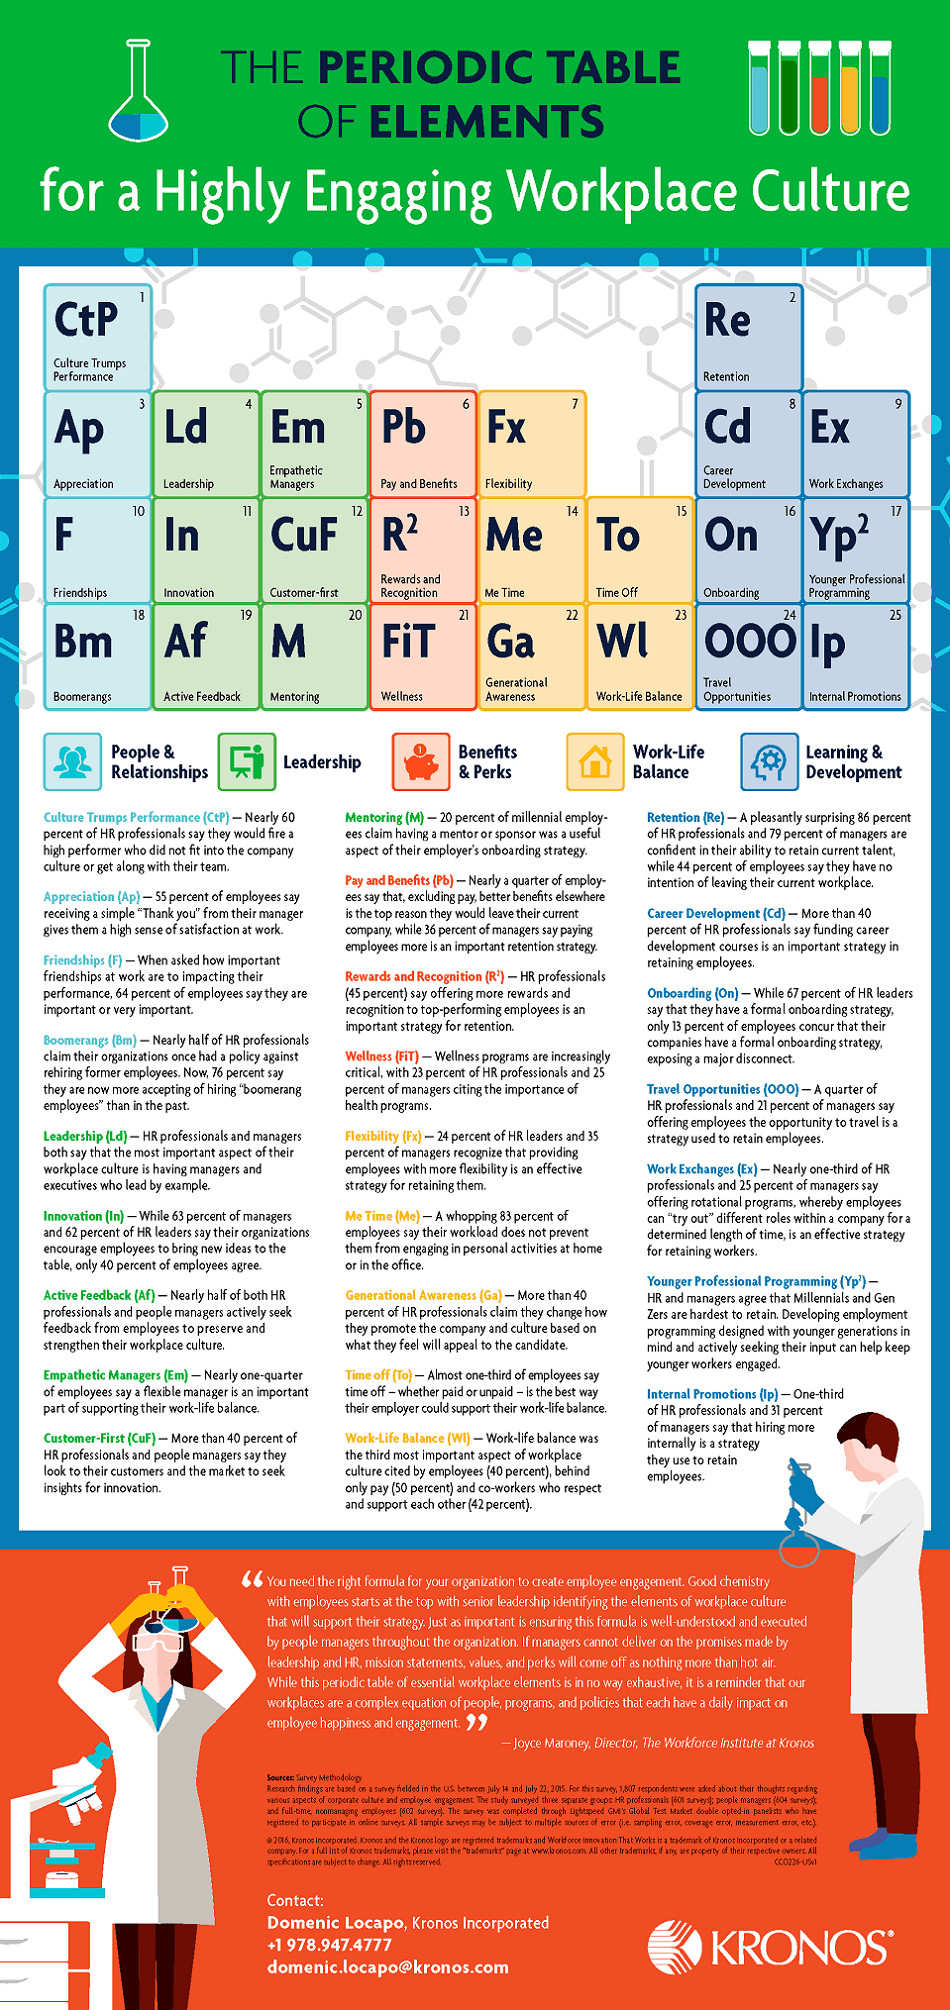 The Periodic Table of Elements for a Highly Engaging Workplace Culture Infographic